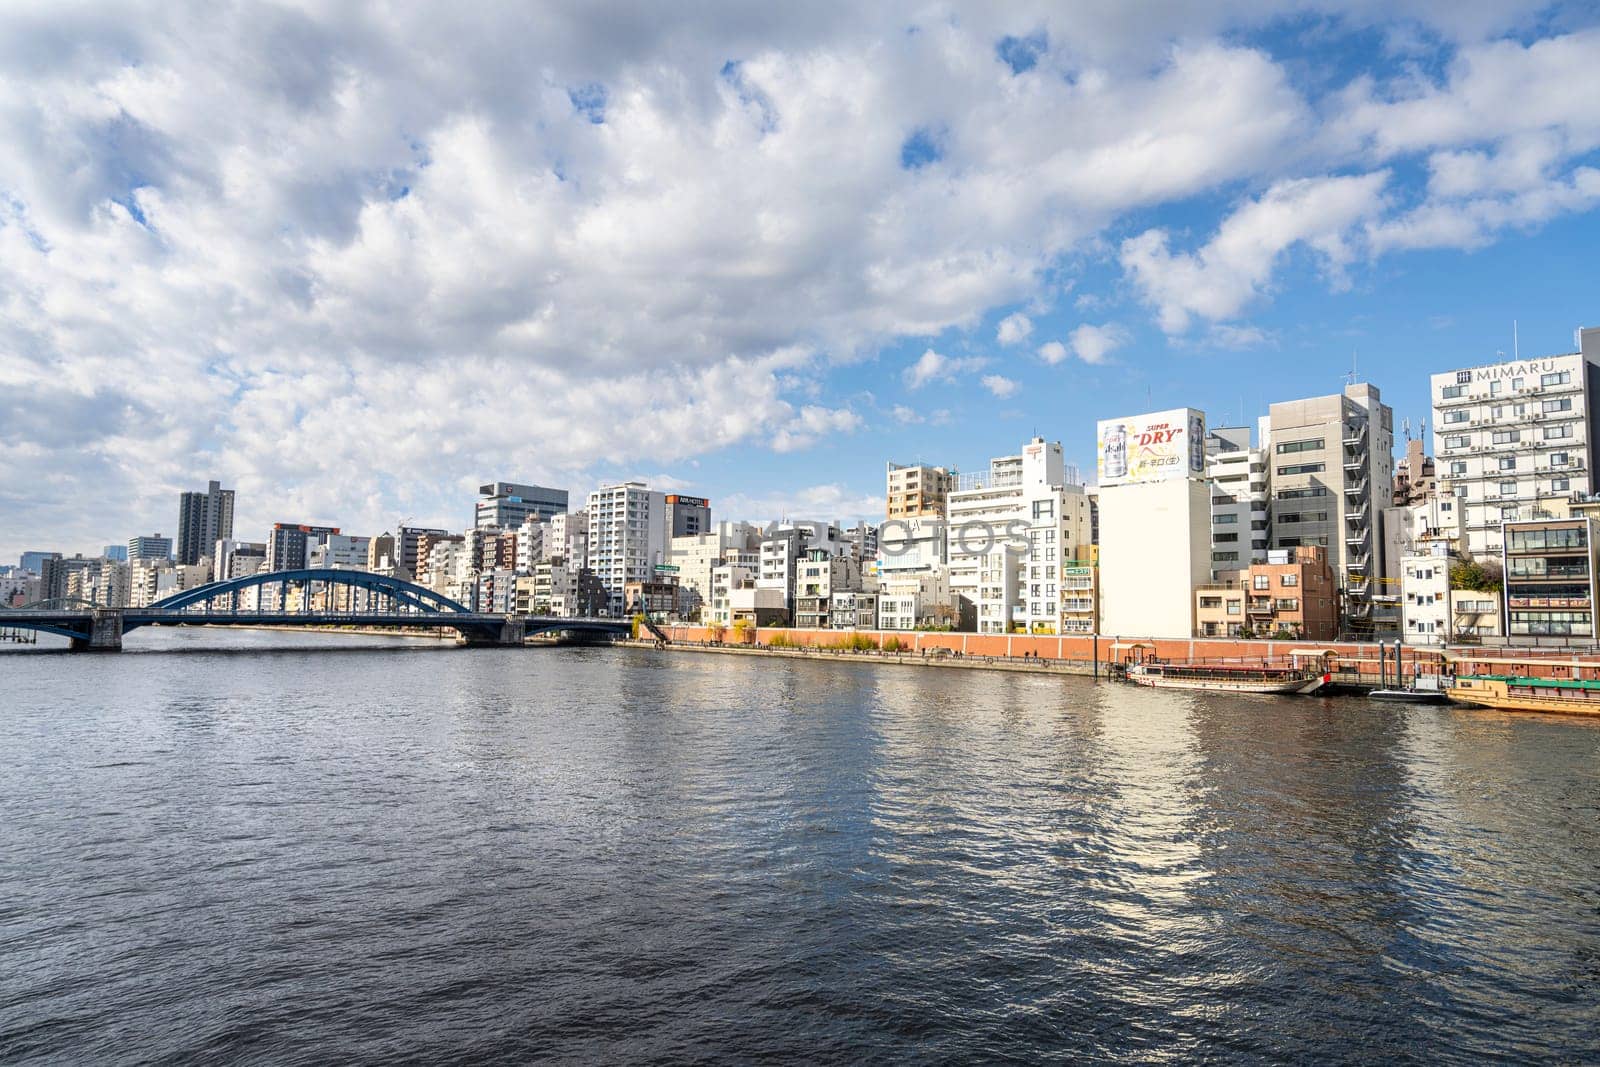  Sumida River in Tokyo, Japan by sergiodv